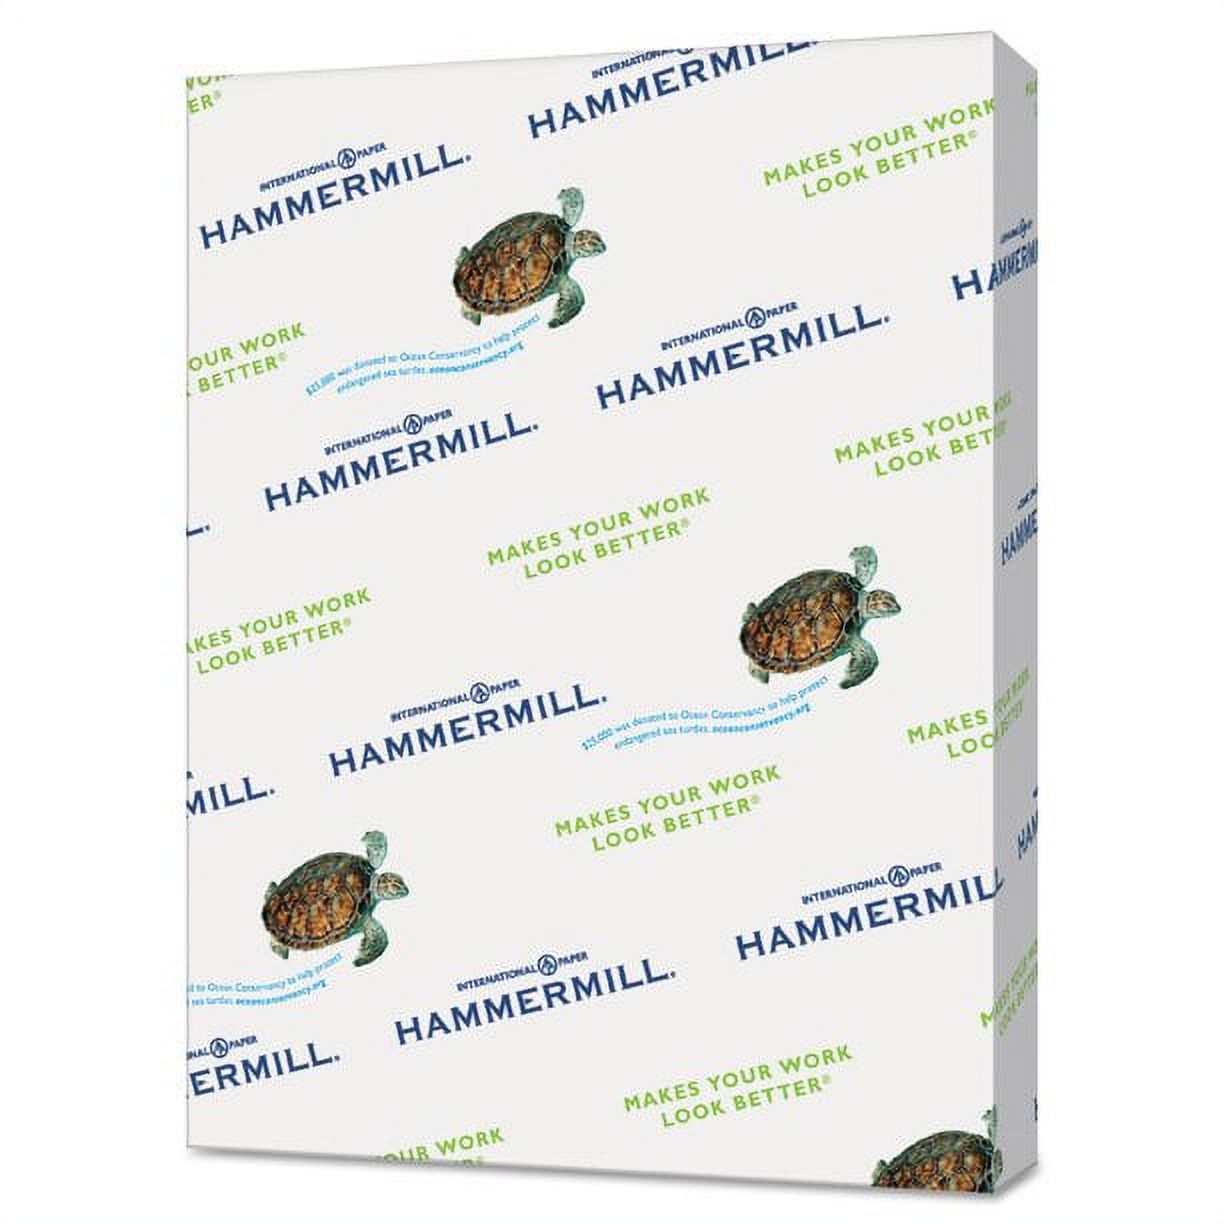 Hammermill Recycled Color Papers, 8.5" x 11", 500 Sheets - image 2 of 4